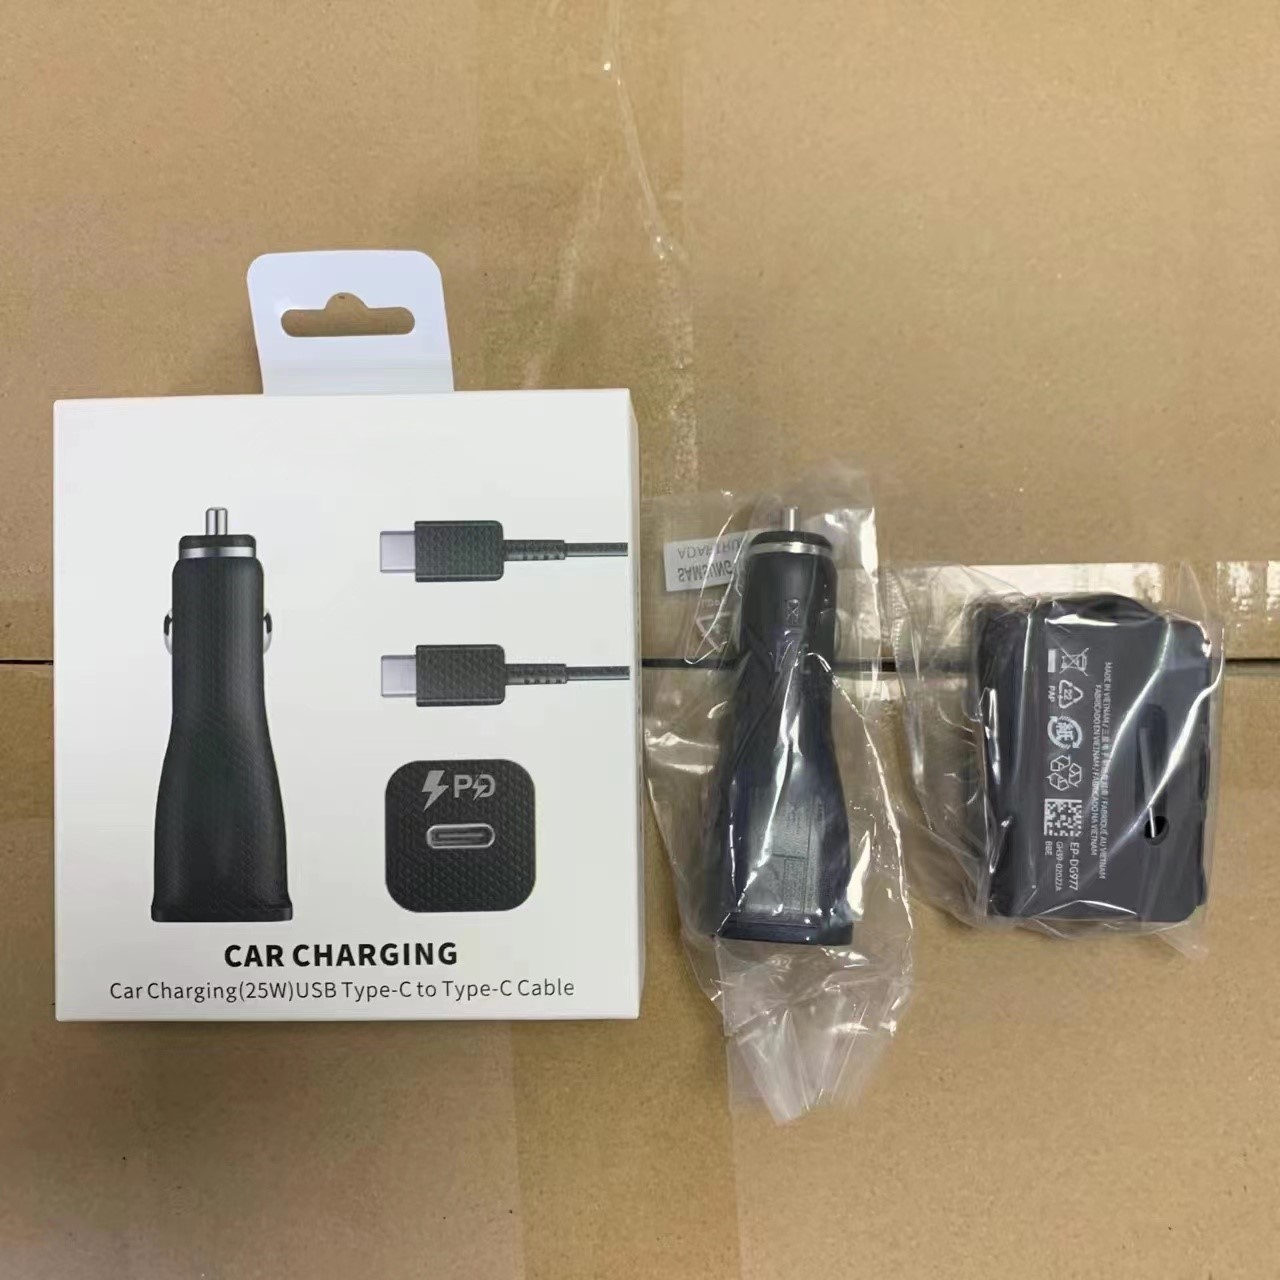 

oem quality 25w pd Car Charger Adapter super fast charging type c ports Bullet quick adaptive car sockets for Samsung s22 note10 with retail packaging box